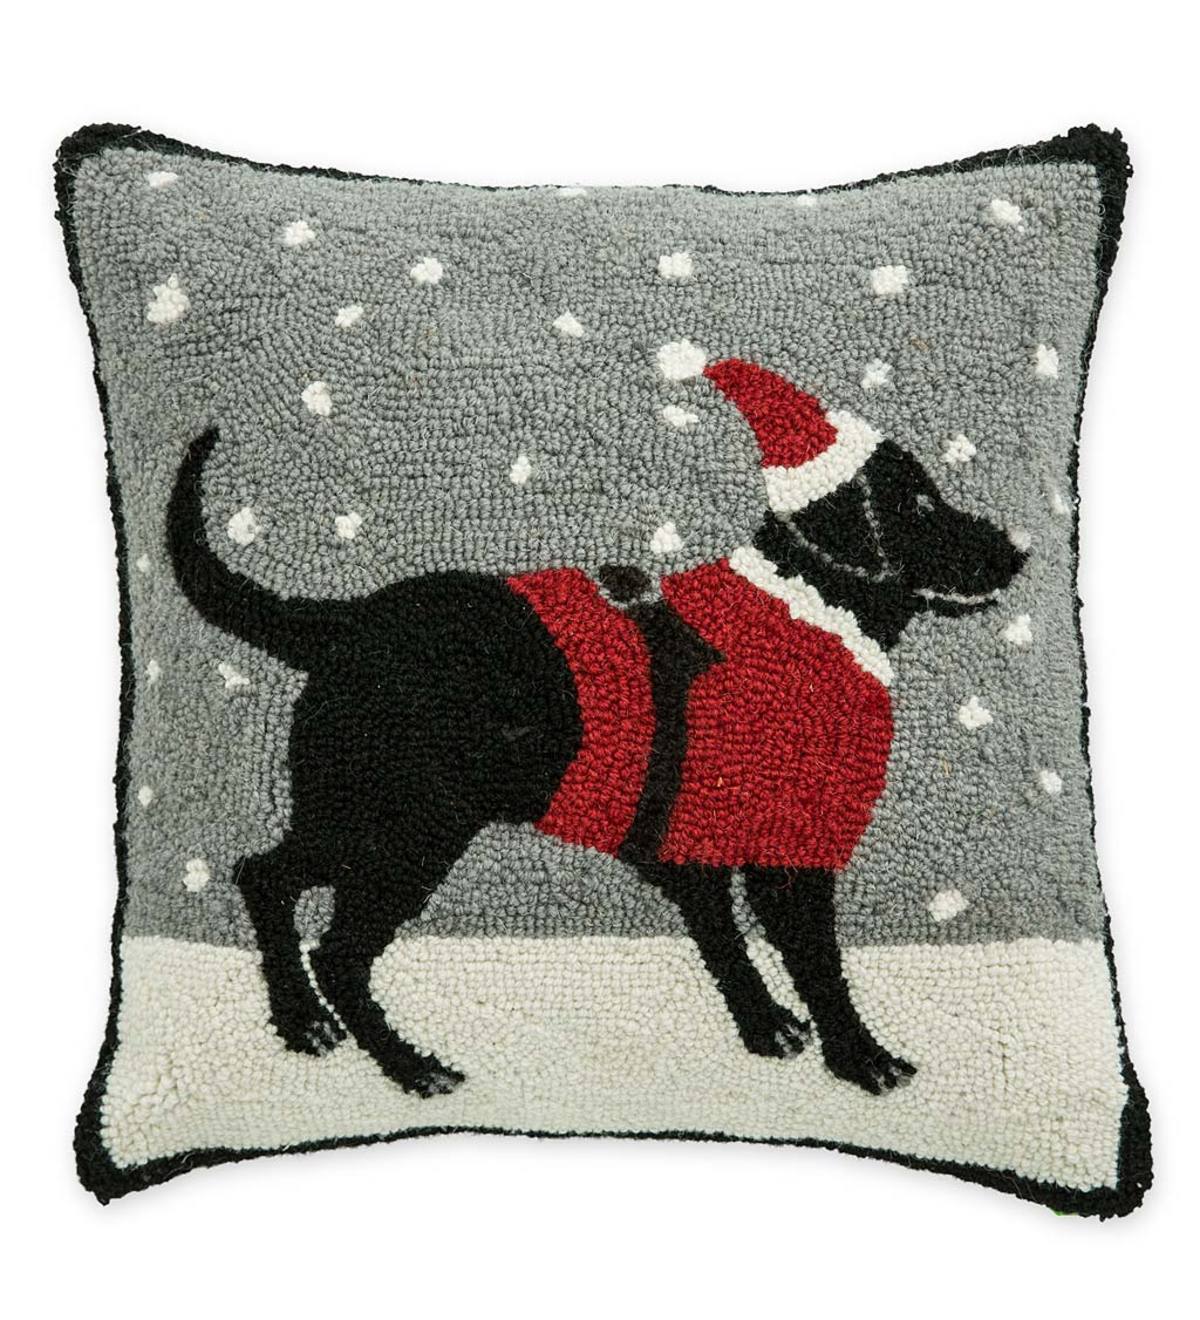 Hand-Hooked Wool Labrador Snow Day Throw Pillow